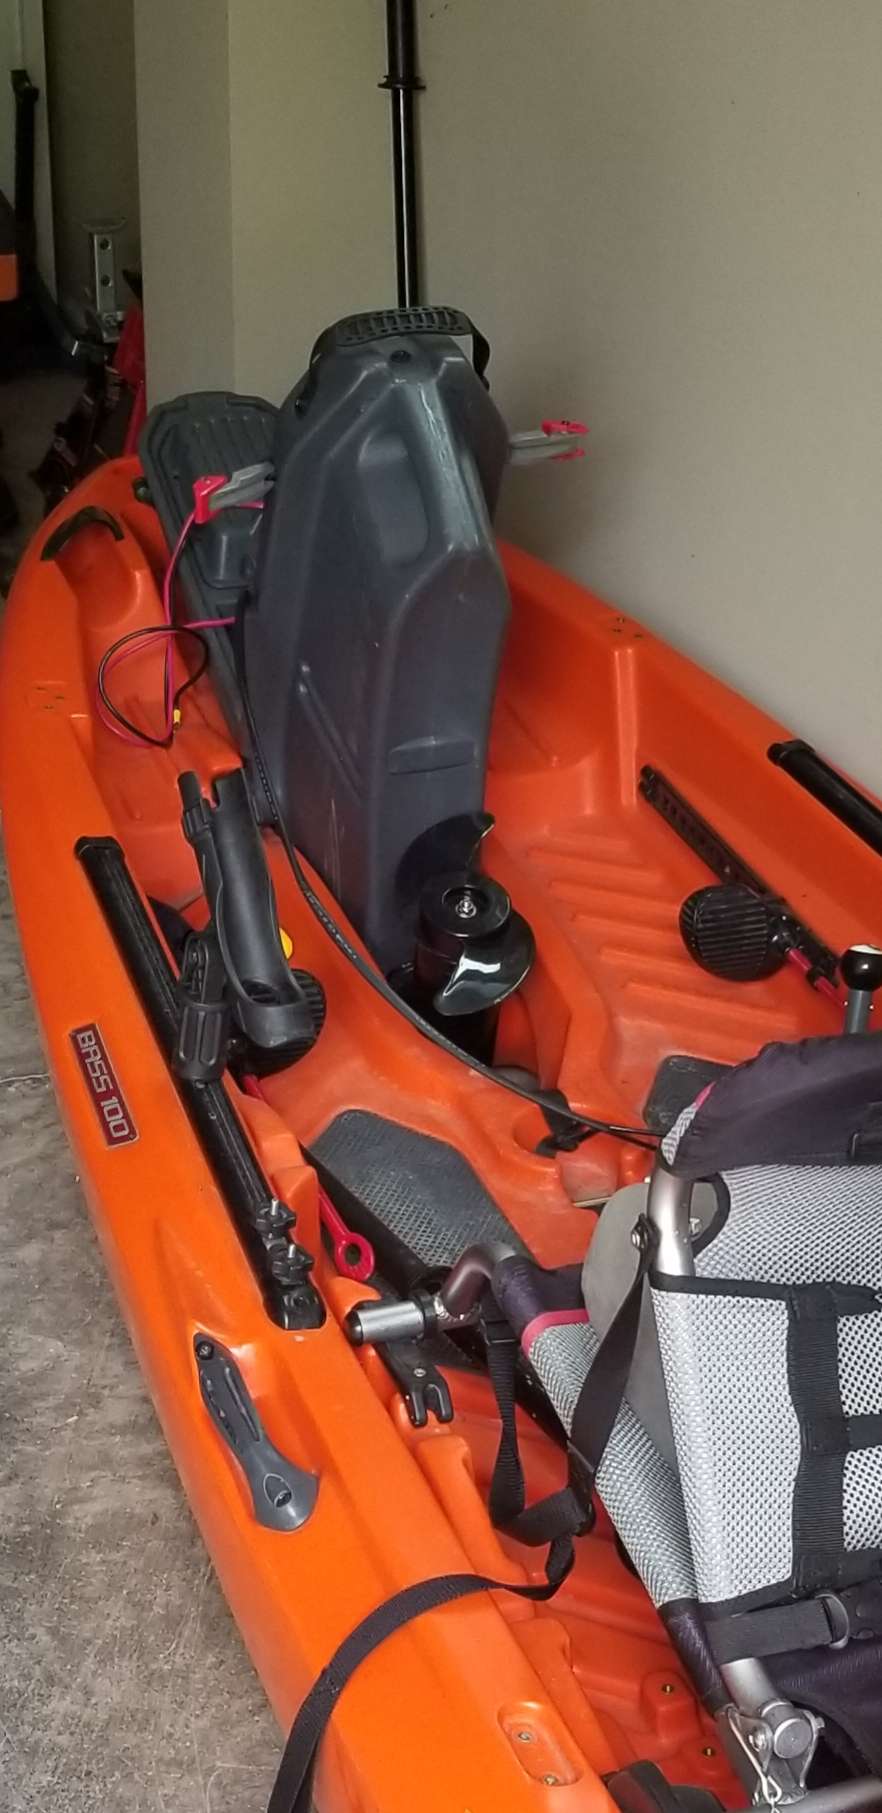 Best fishing kayak under $1,000? - Bass Boats, Canoes, Kayaks and